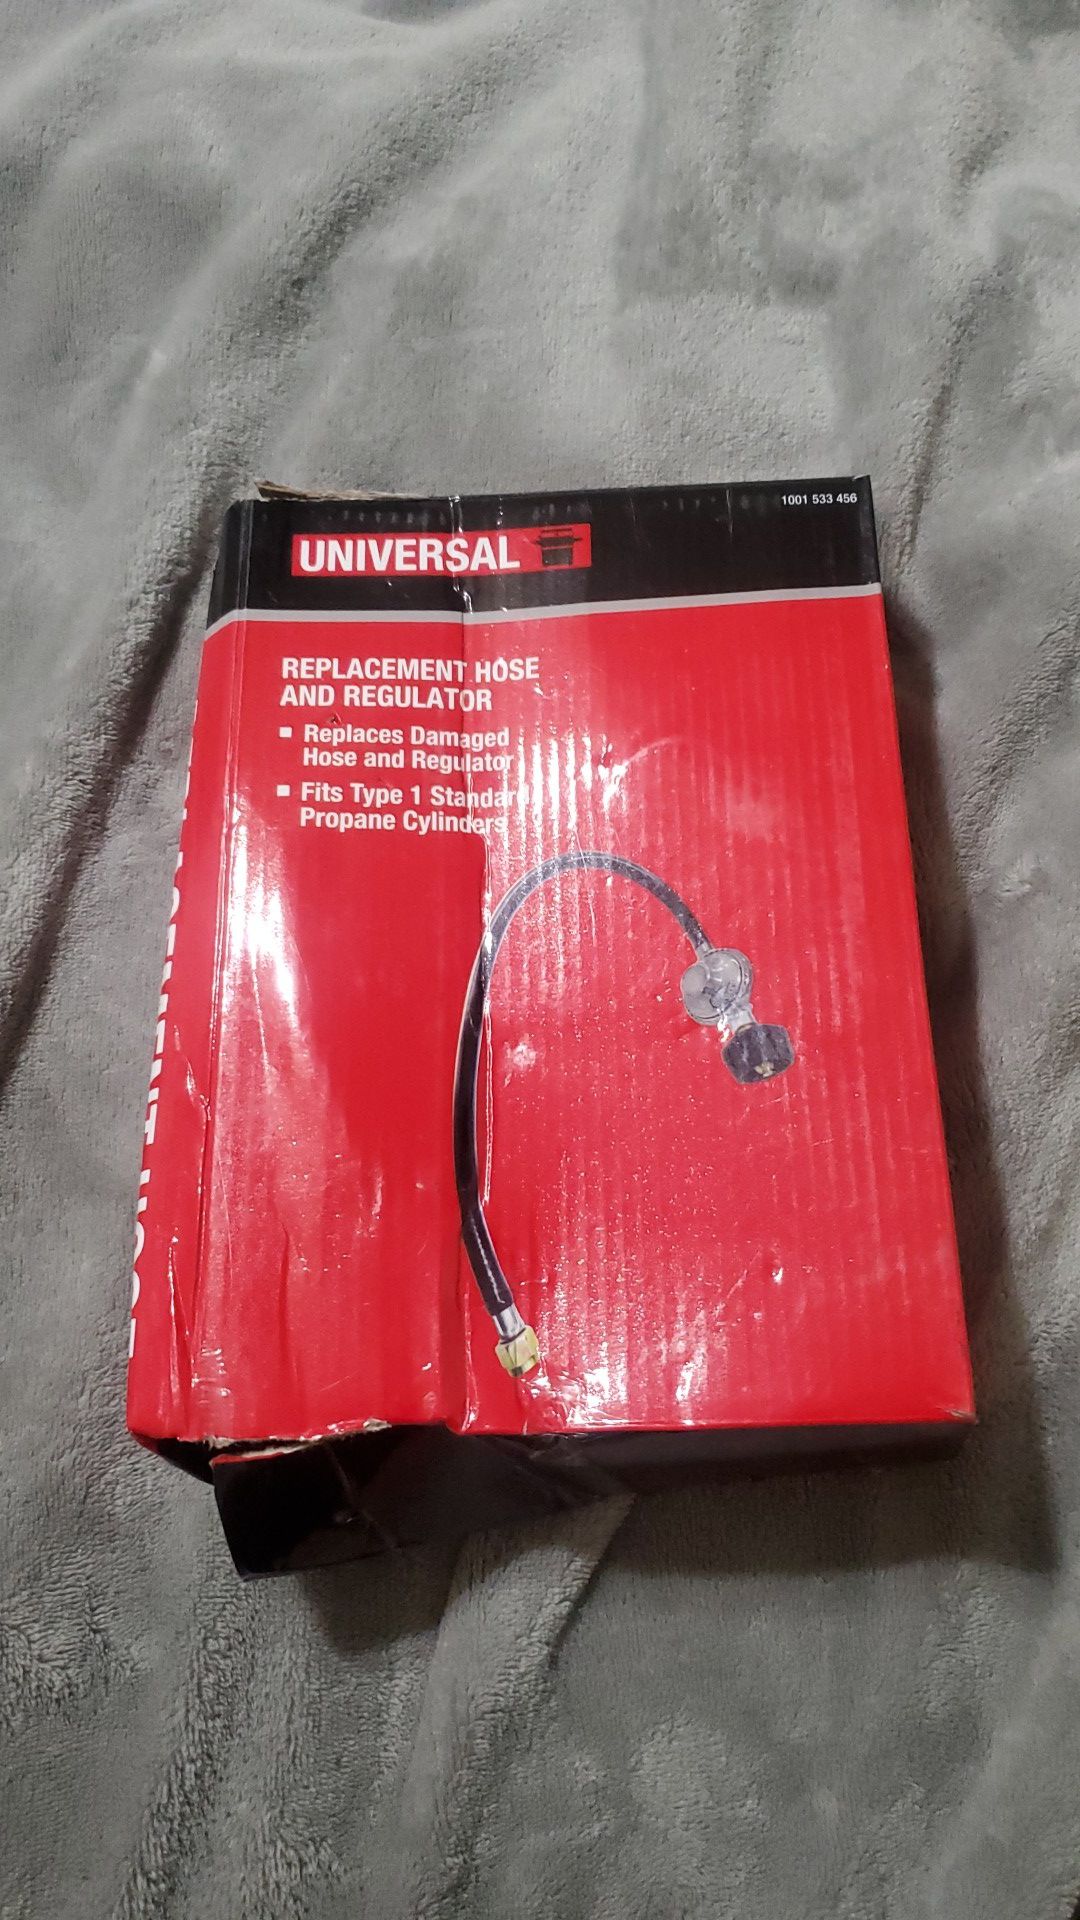 Universal BBQ Grill Replacement Hose & Regulator for Gas Grill Models